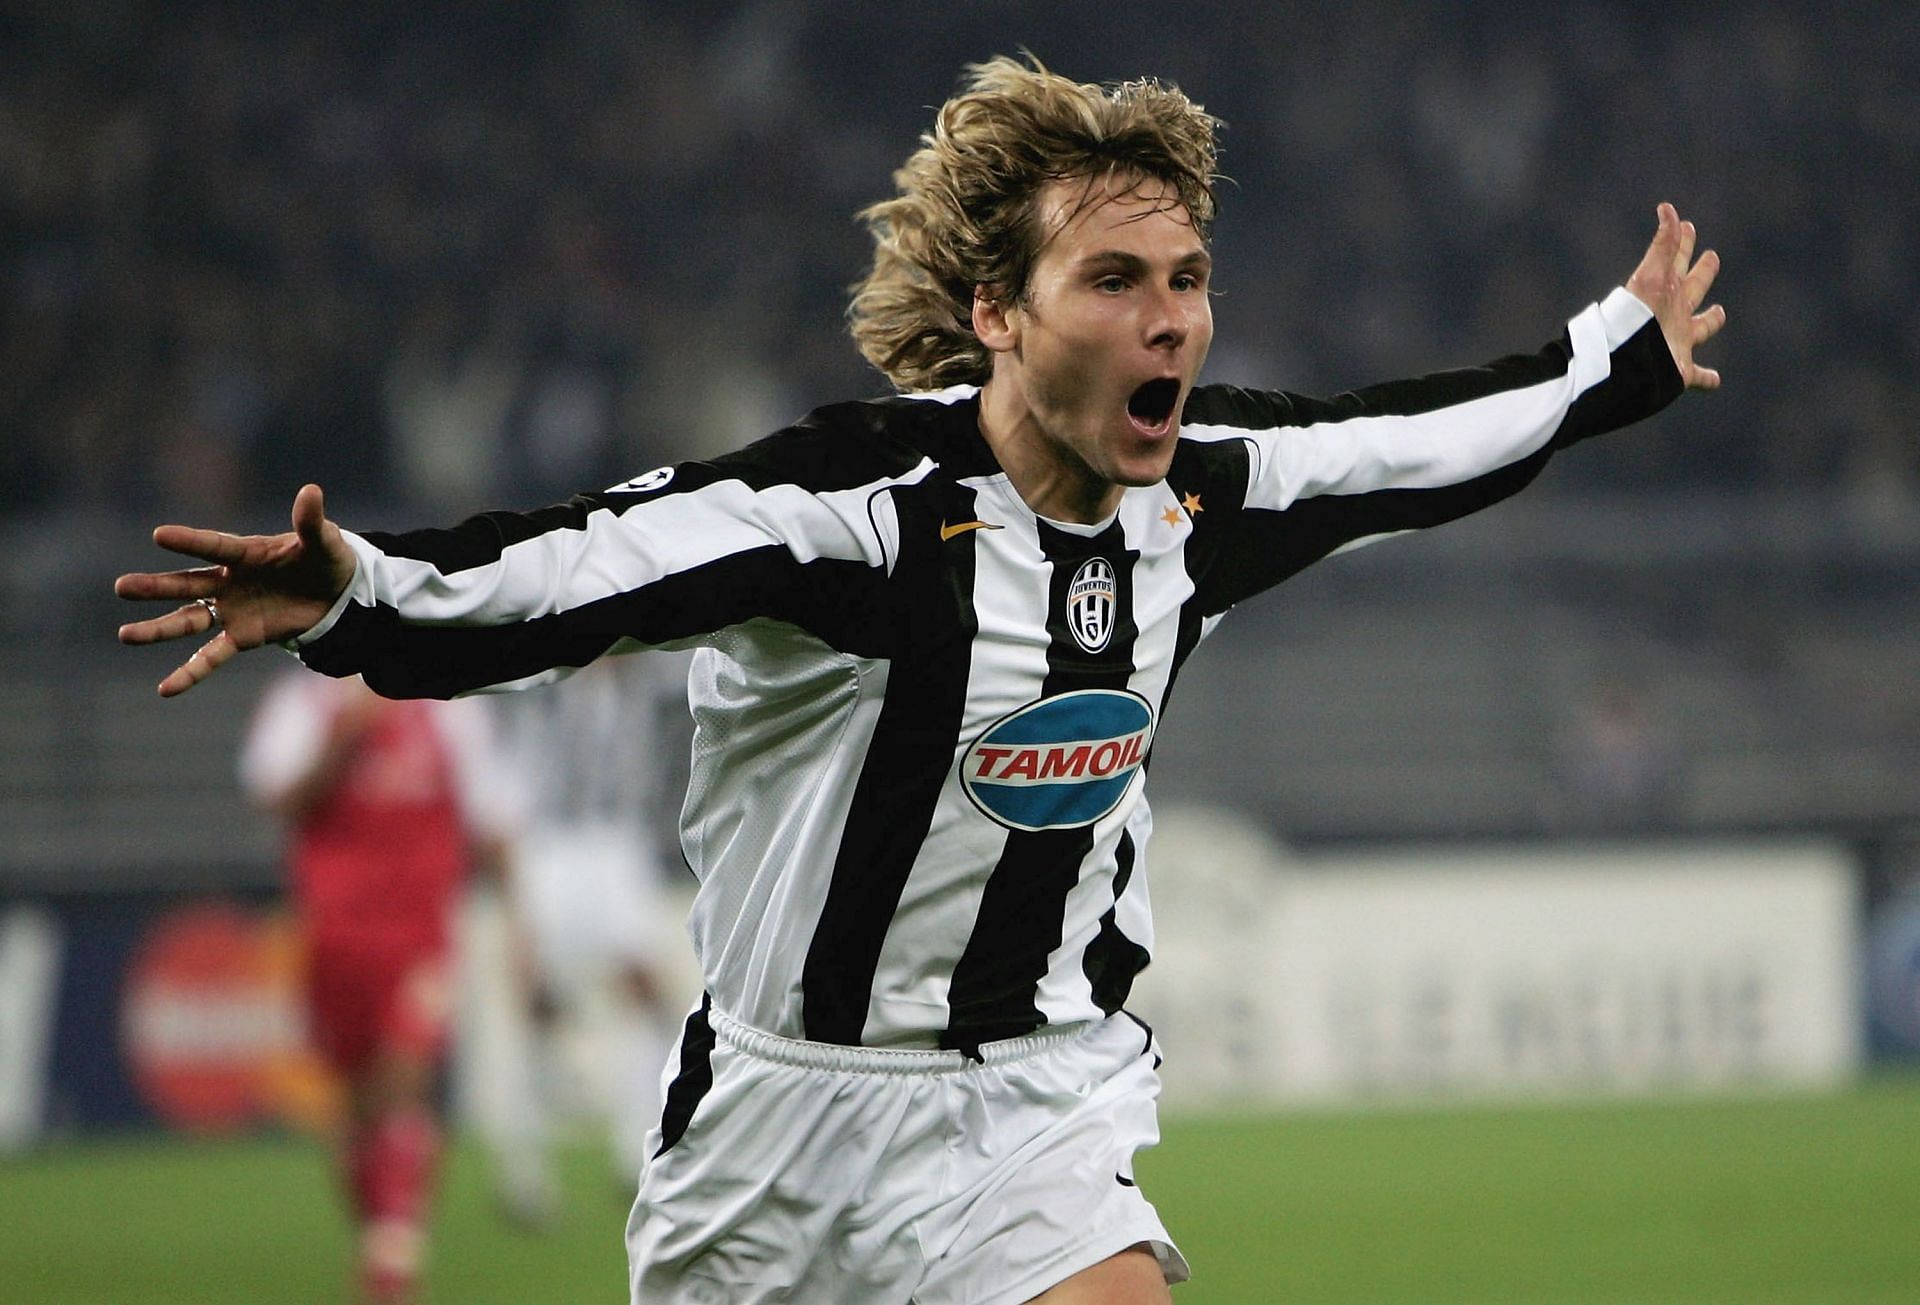 Pavel Nedved was one of the most furious strikers of a football